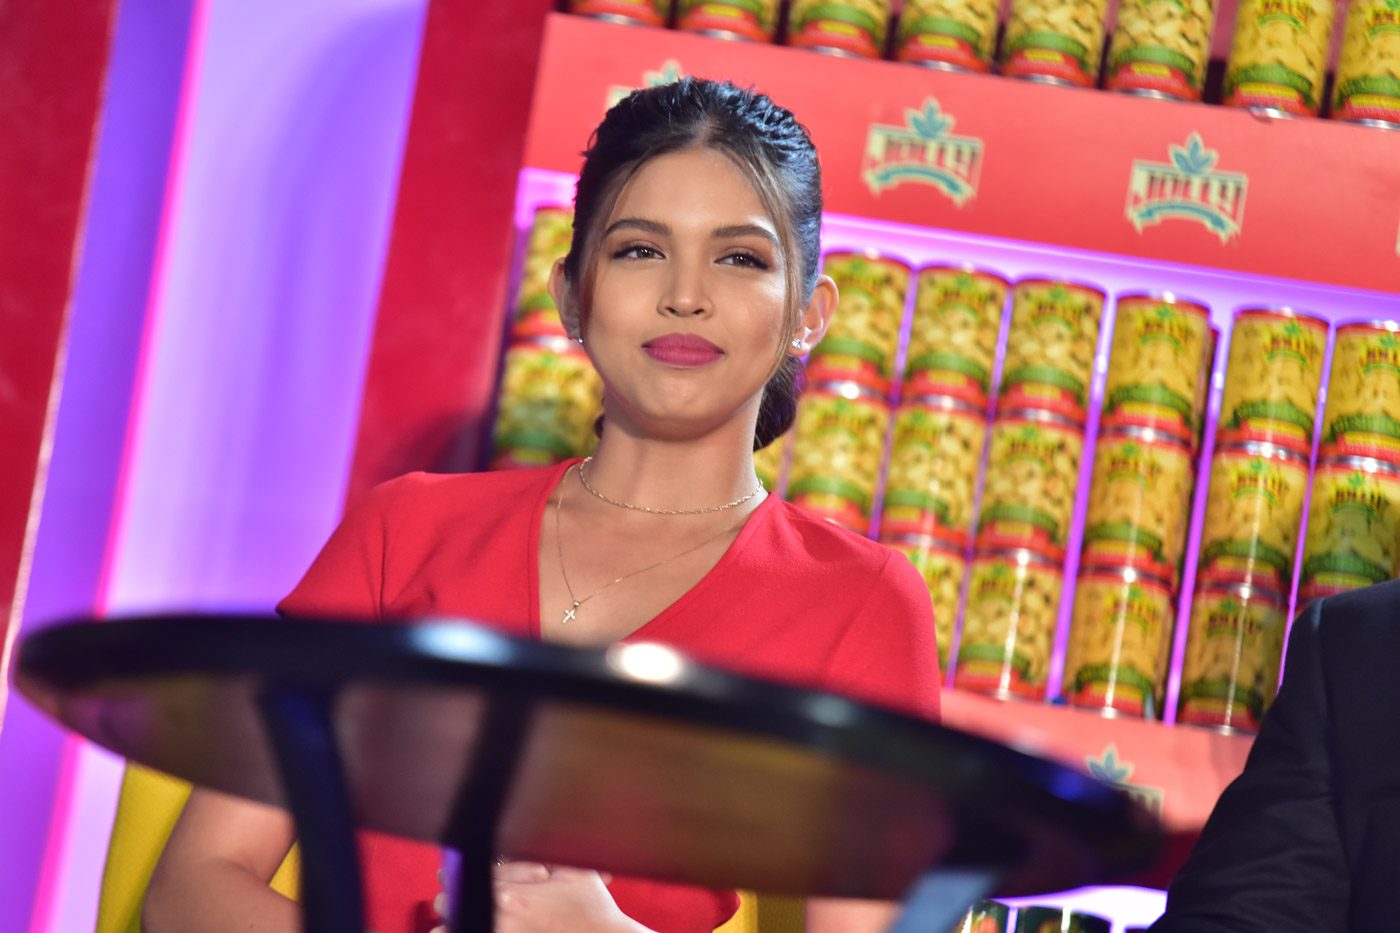 Maine Mendoza asks fans for ‘freedom’ in open letter